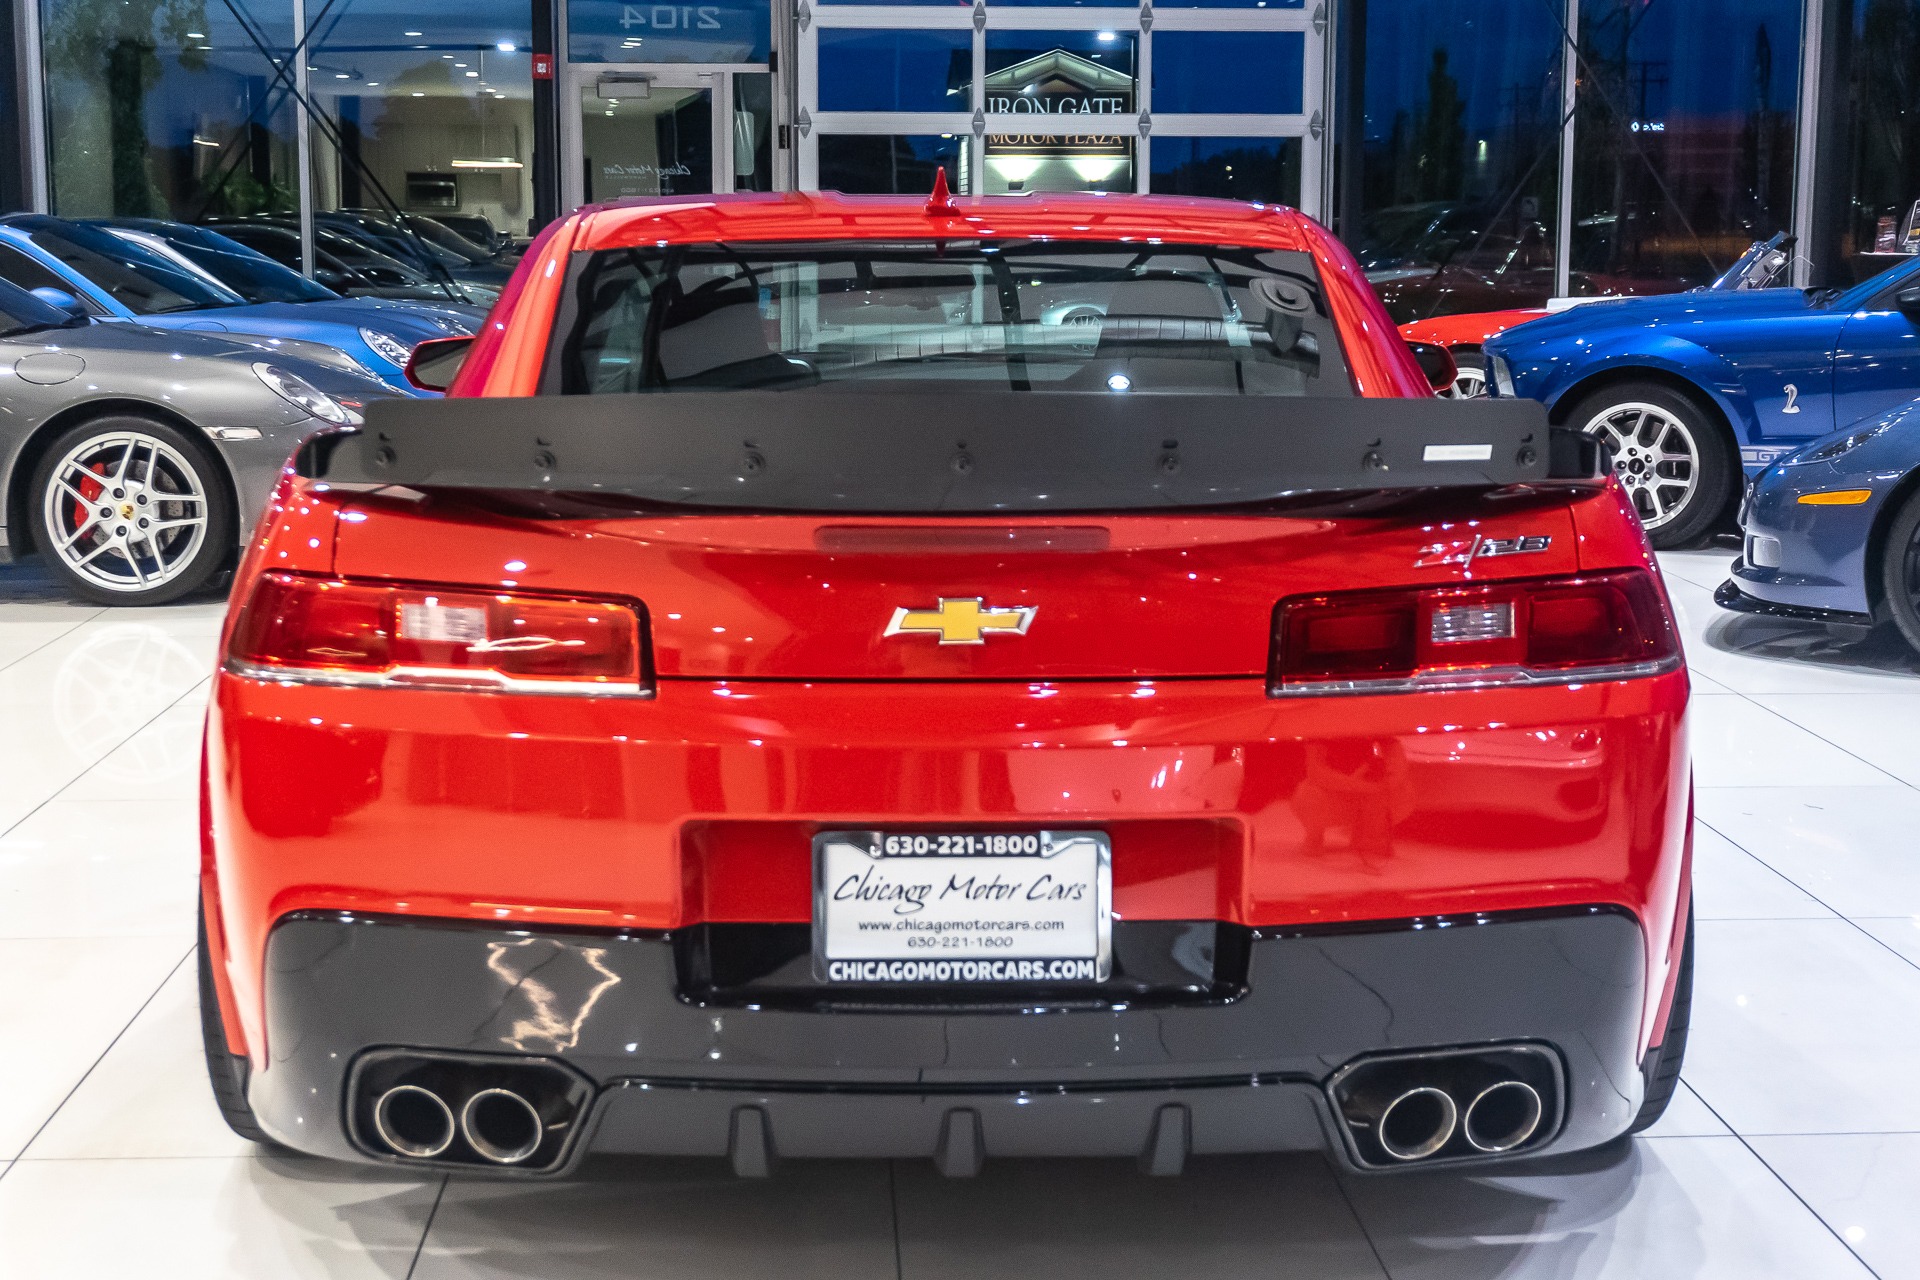 Used-2015-Chevrolet-Camaro-Z28-Coupe-STAGE-2-KATECH-PERFORMANCE